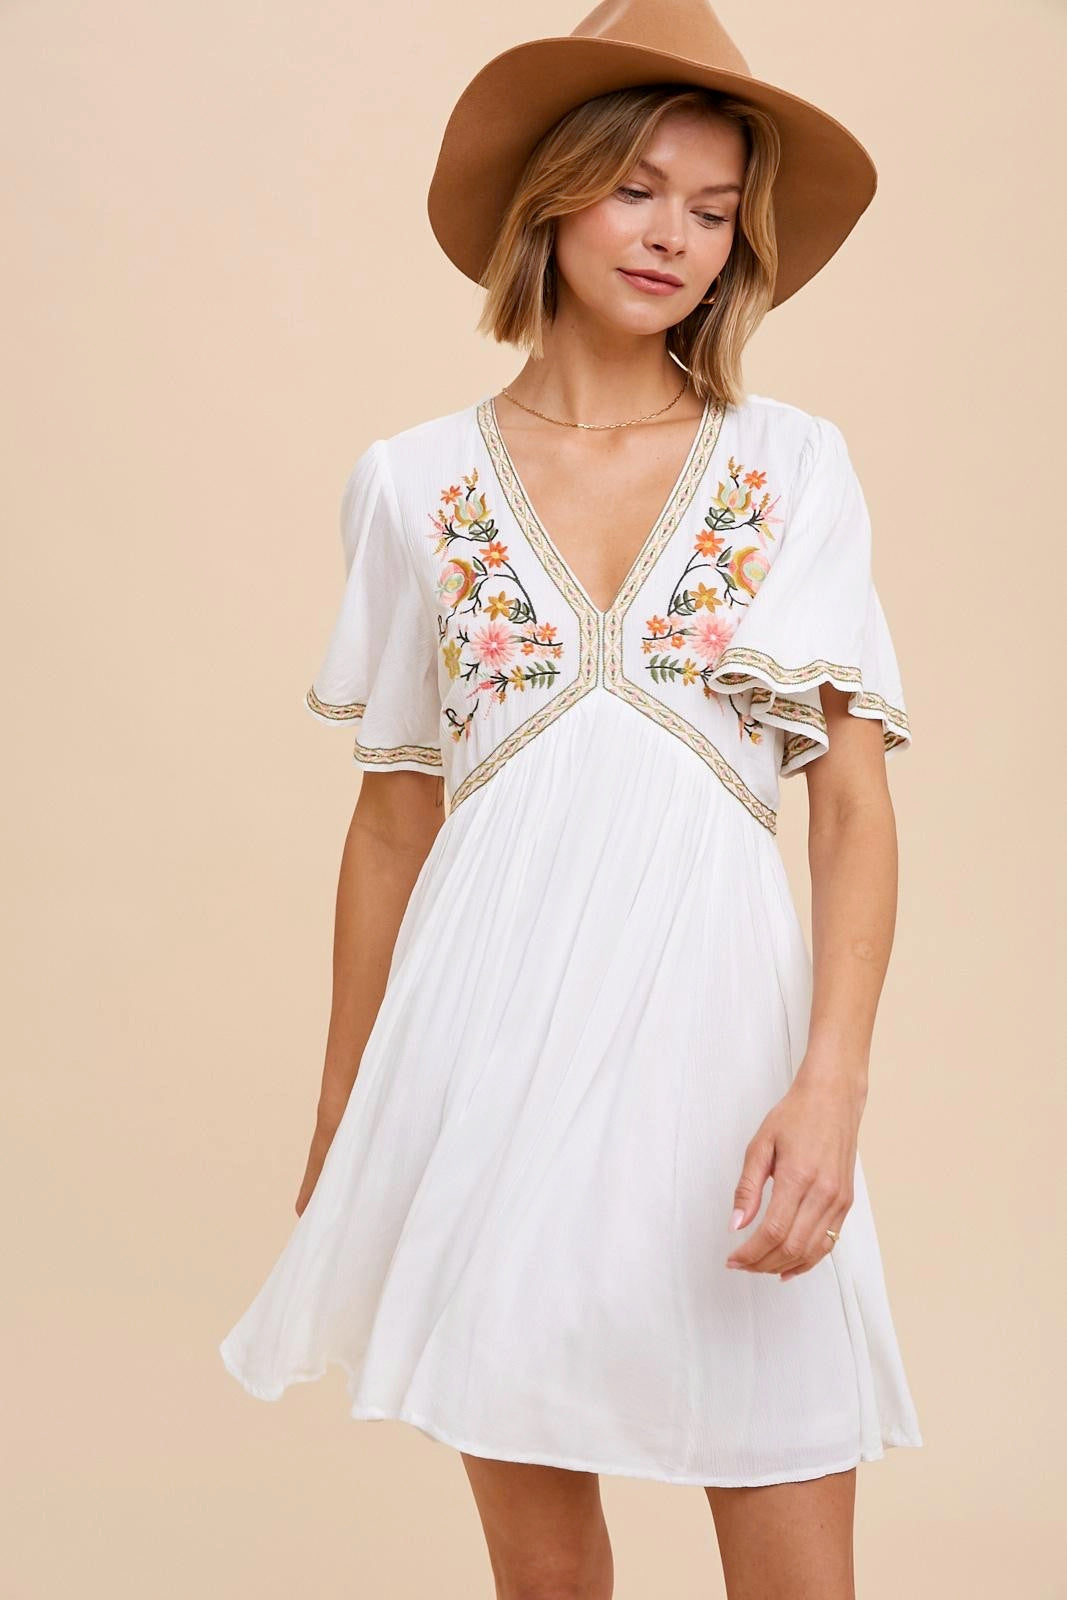 Lilly embroidered floral white mini dress